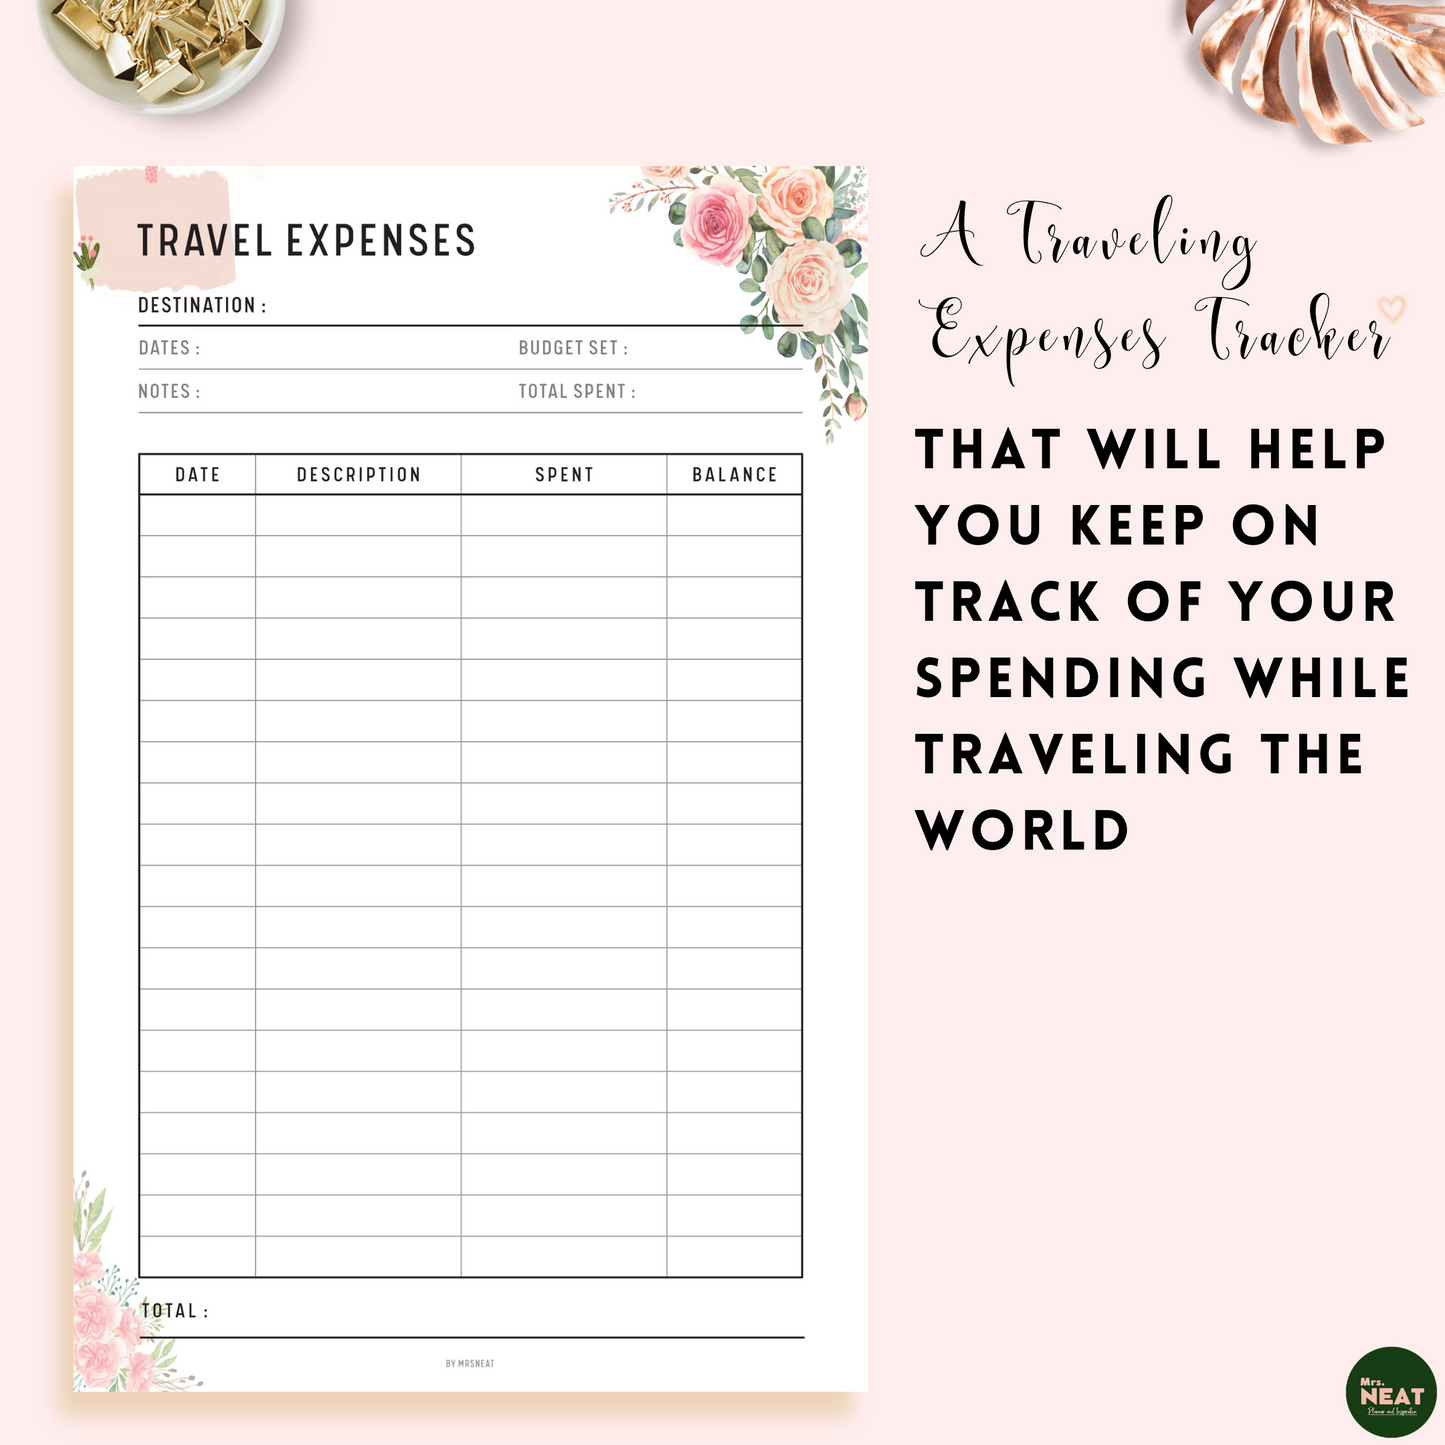 Floral Travel Expenses Tracker Planner to help keep on track of spending while traveling the world